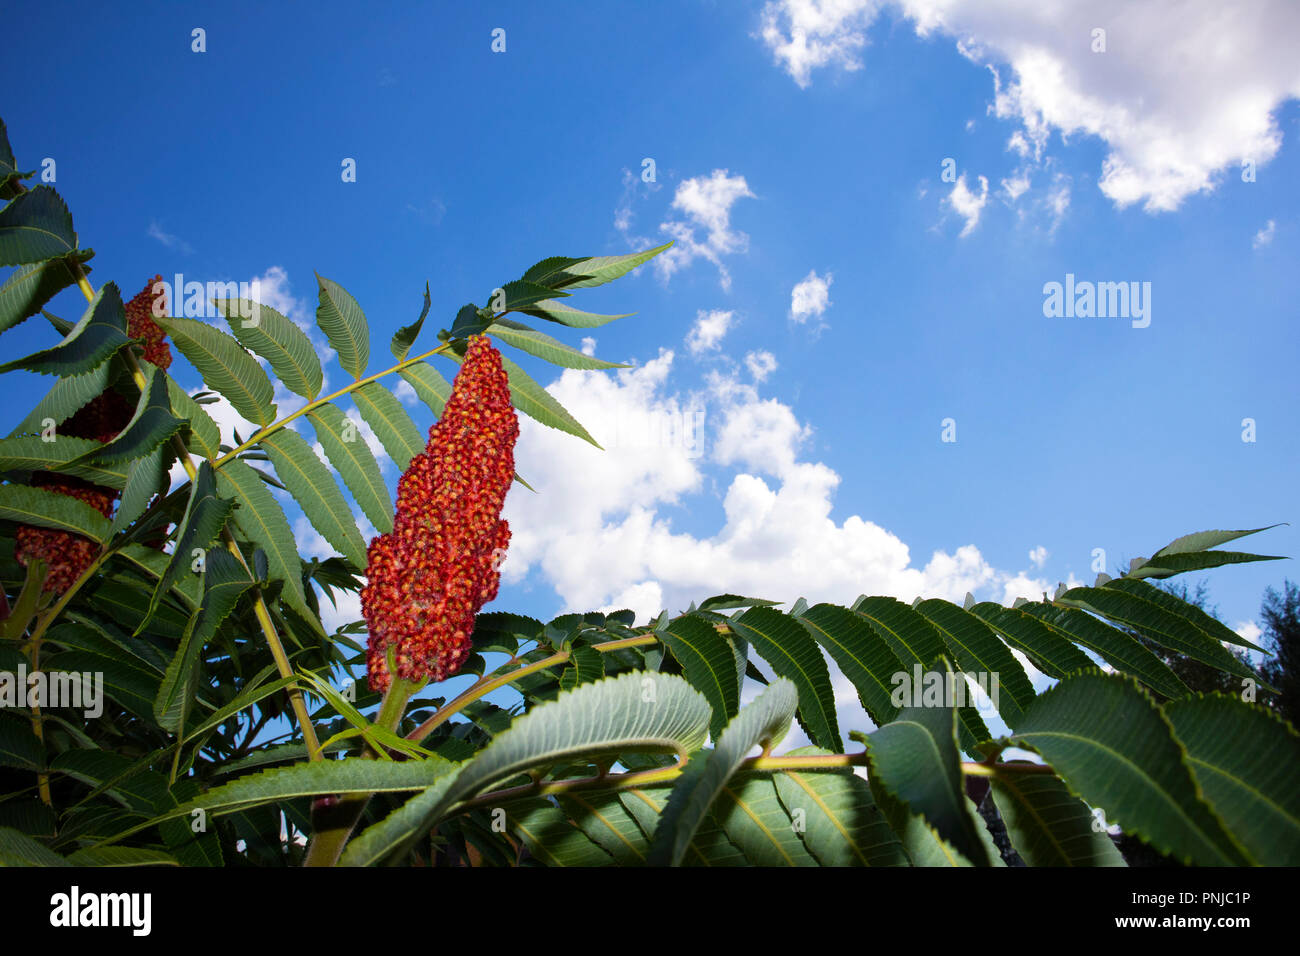 Lush foliage of garden Rhus typhina bush with cone-shaped inflorescence against blue sky Stock Photo